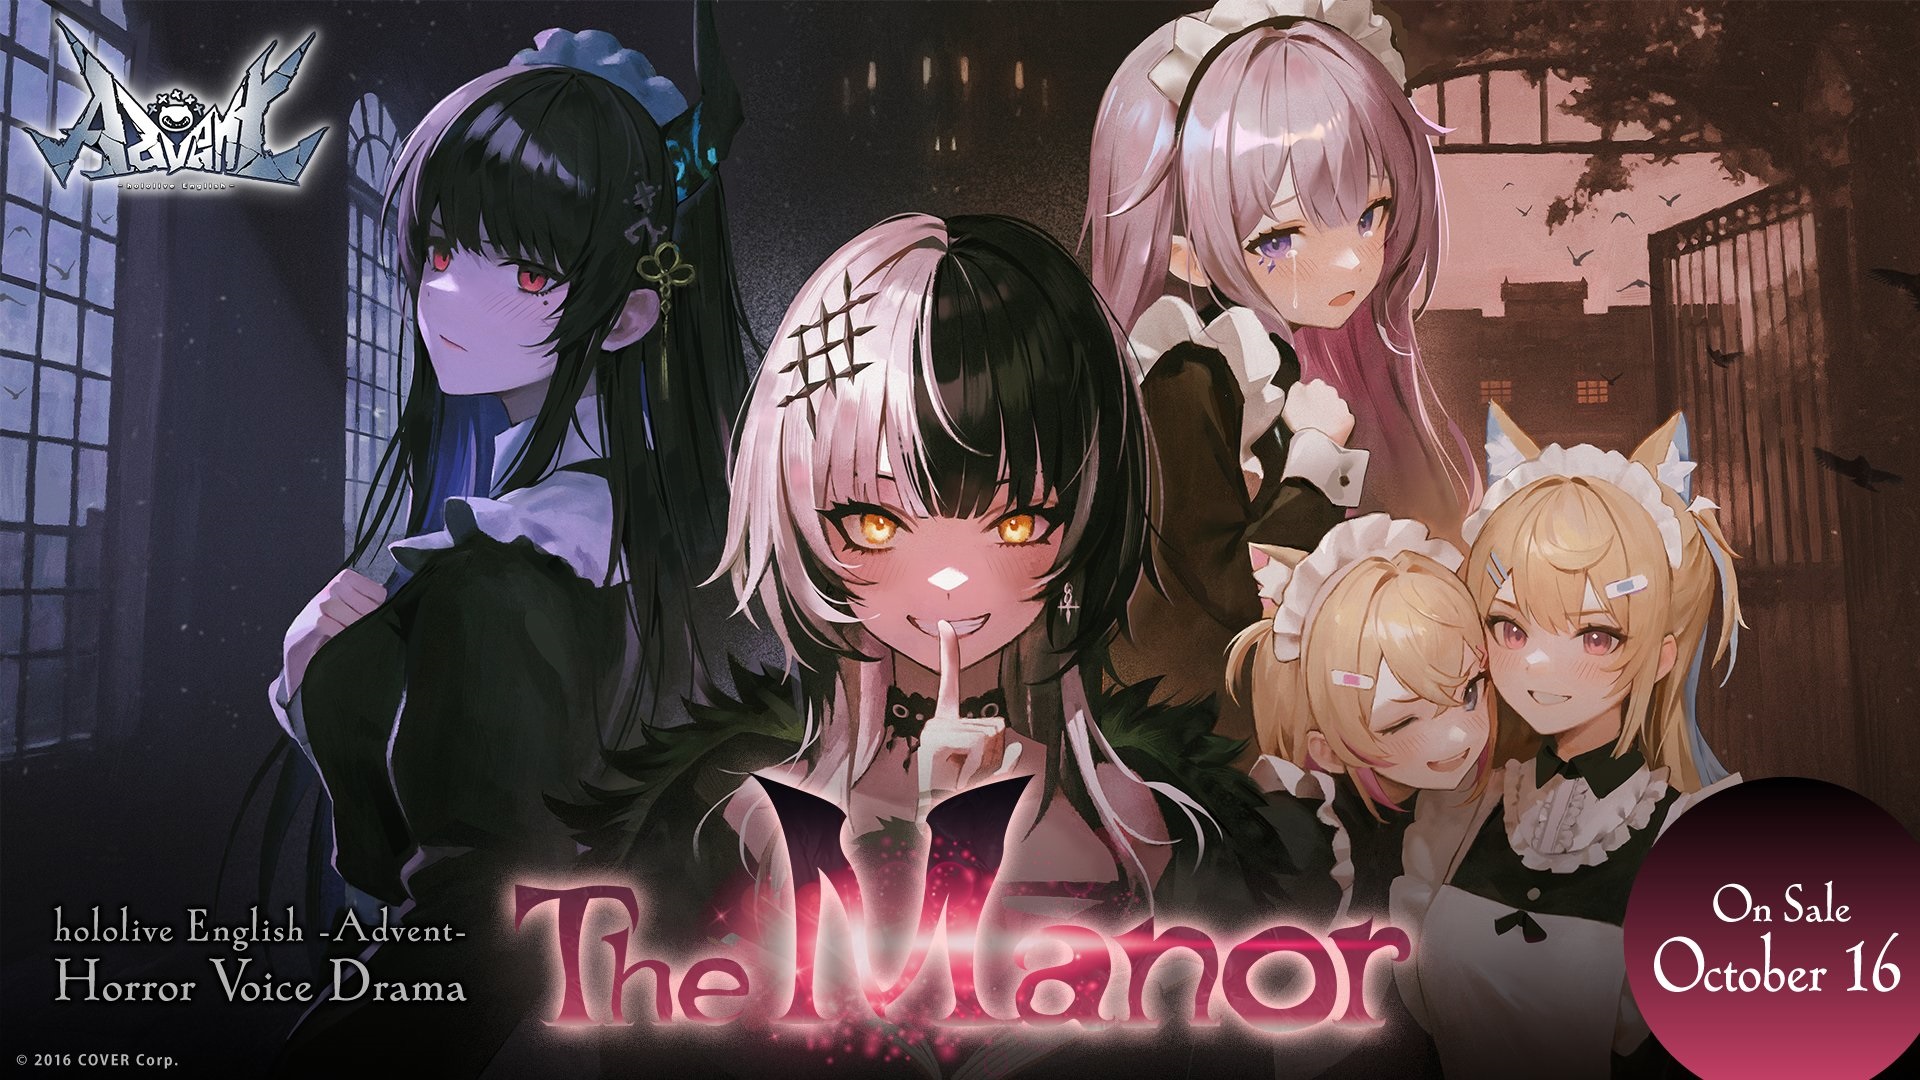 Hololive Advent releases horror voice drama The Manor